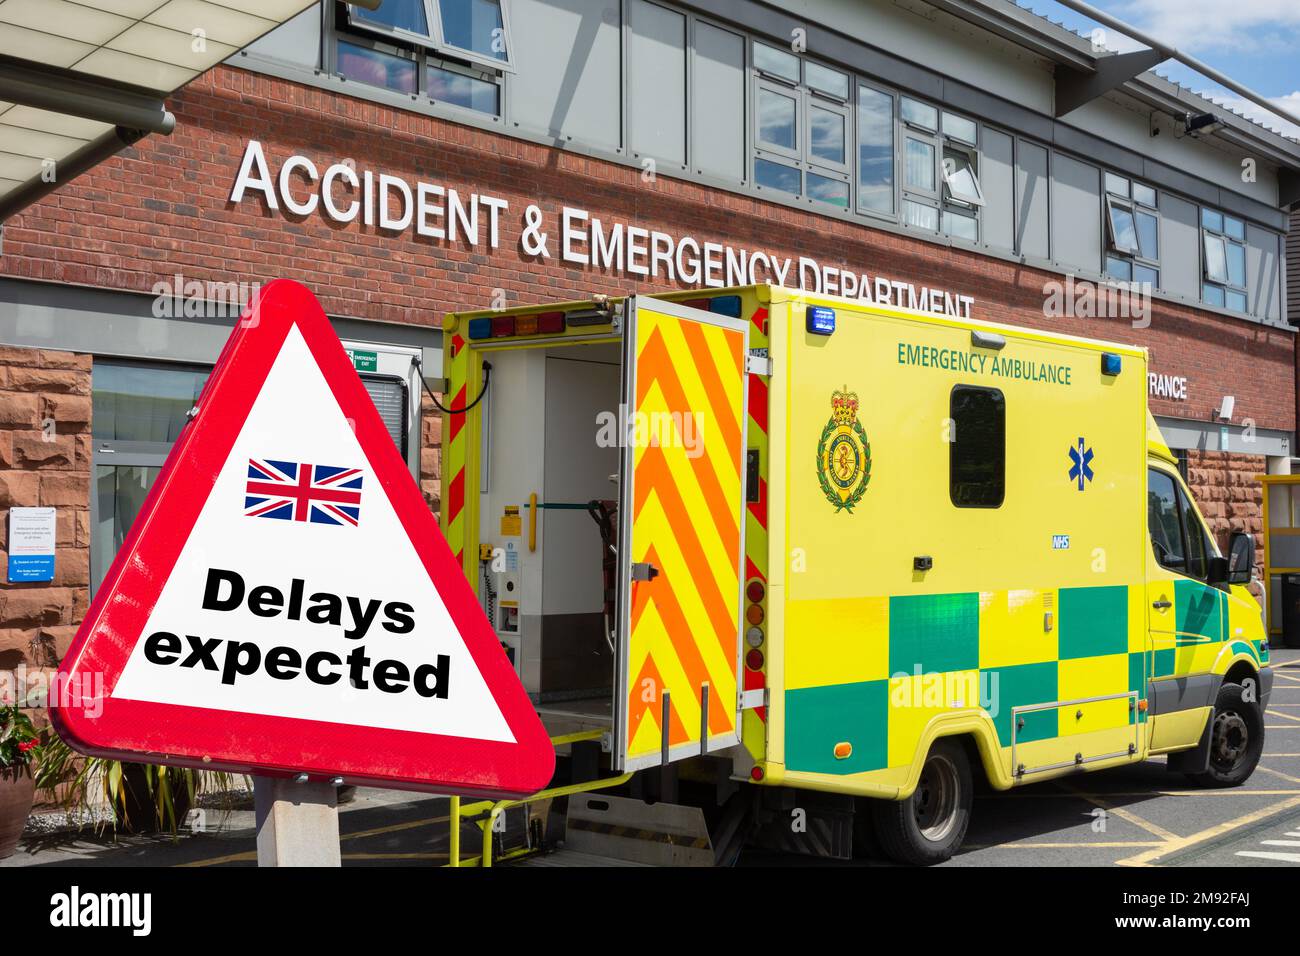 Ambulance outside Accident and Emergency at NHS hospital in England, UK. Delays, NHS crisis, industrial action, strike... concept Stock Photo